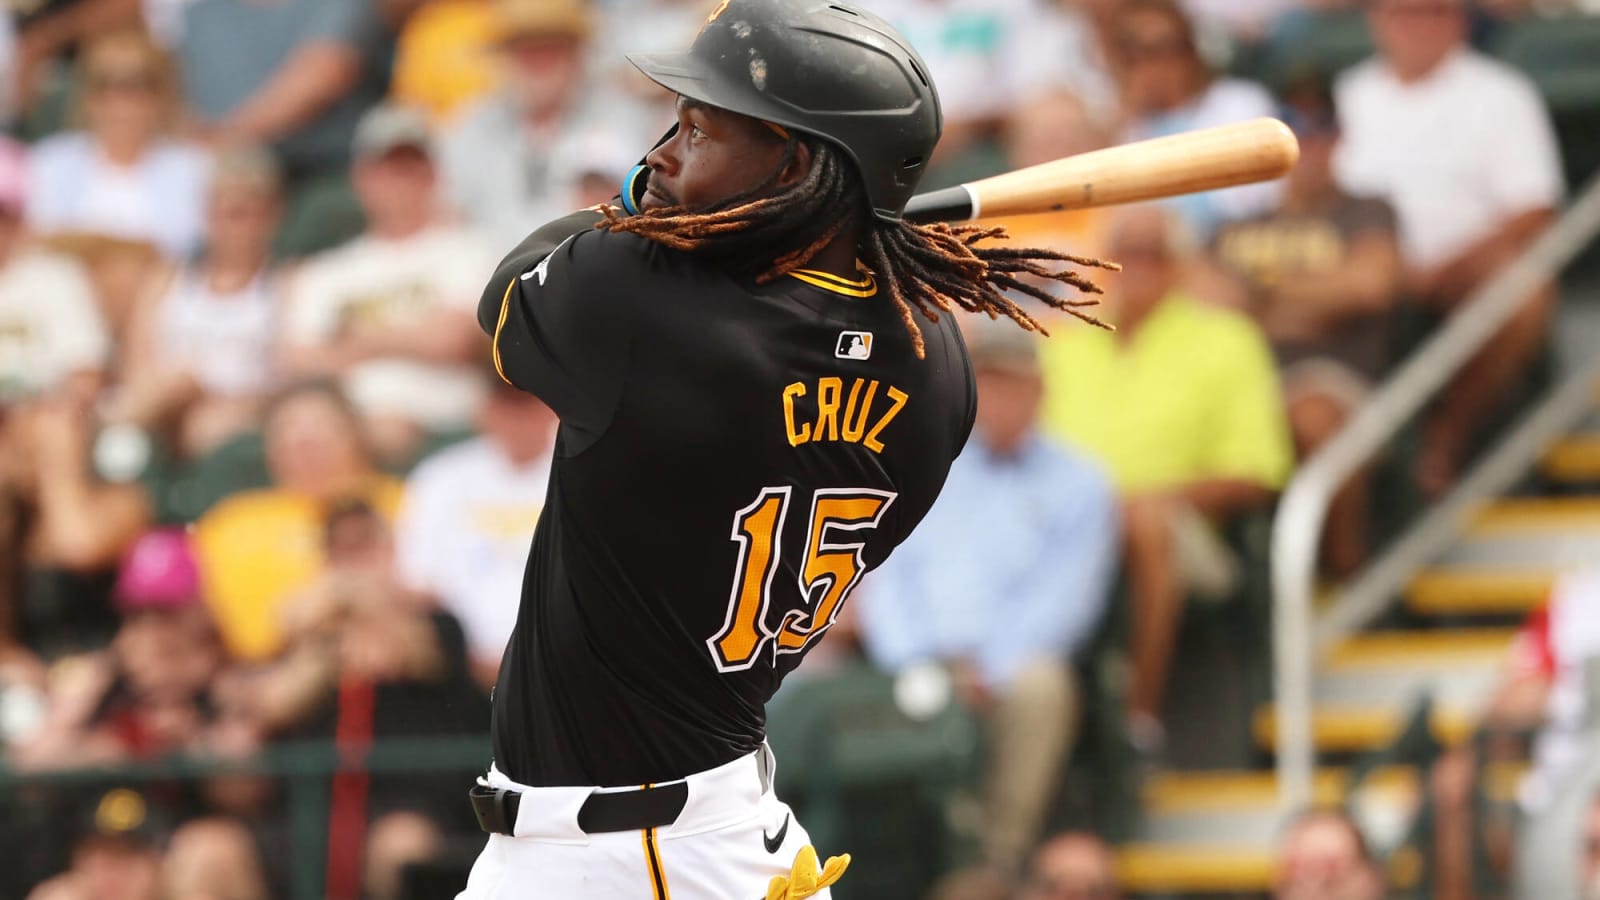 Oneil Cruz’s Huge Game Leads Pirates’ Charge in 11-2 Win Over Phillies